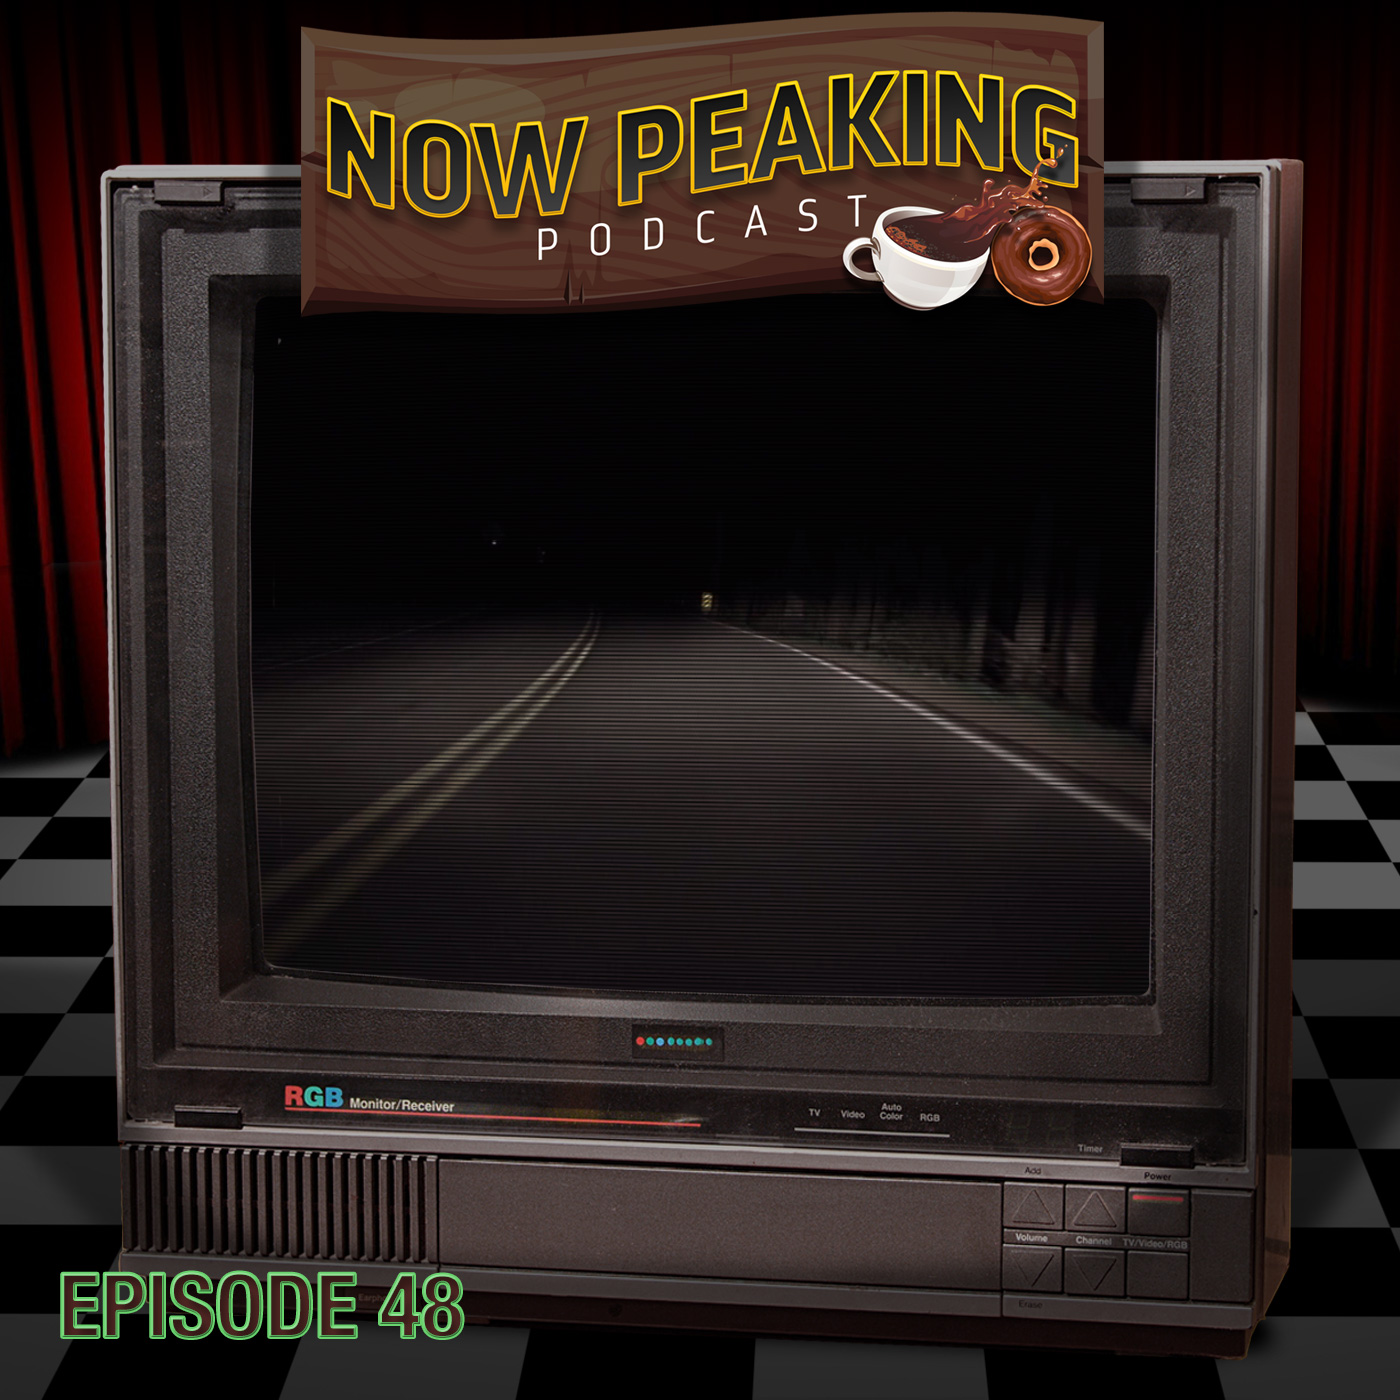 Now Peaking Episode 48: What is your name - For Annual Subscribers 